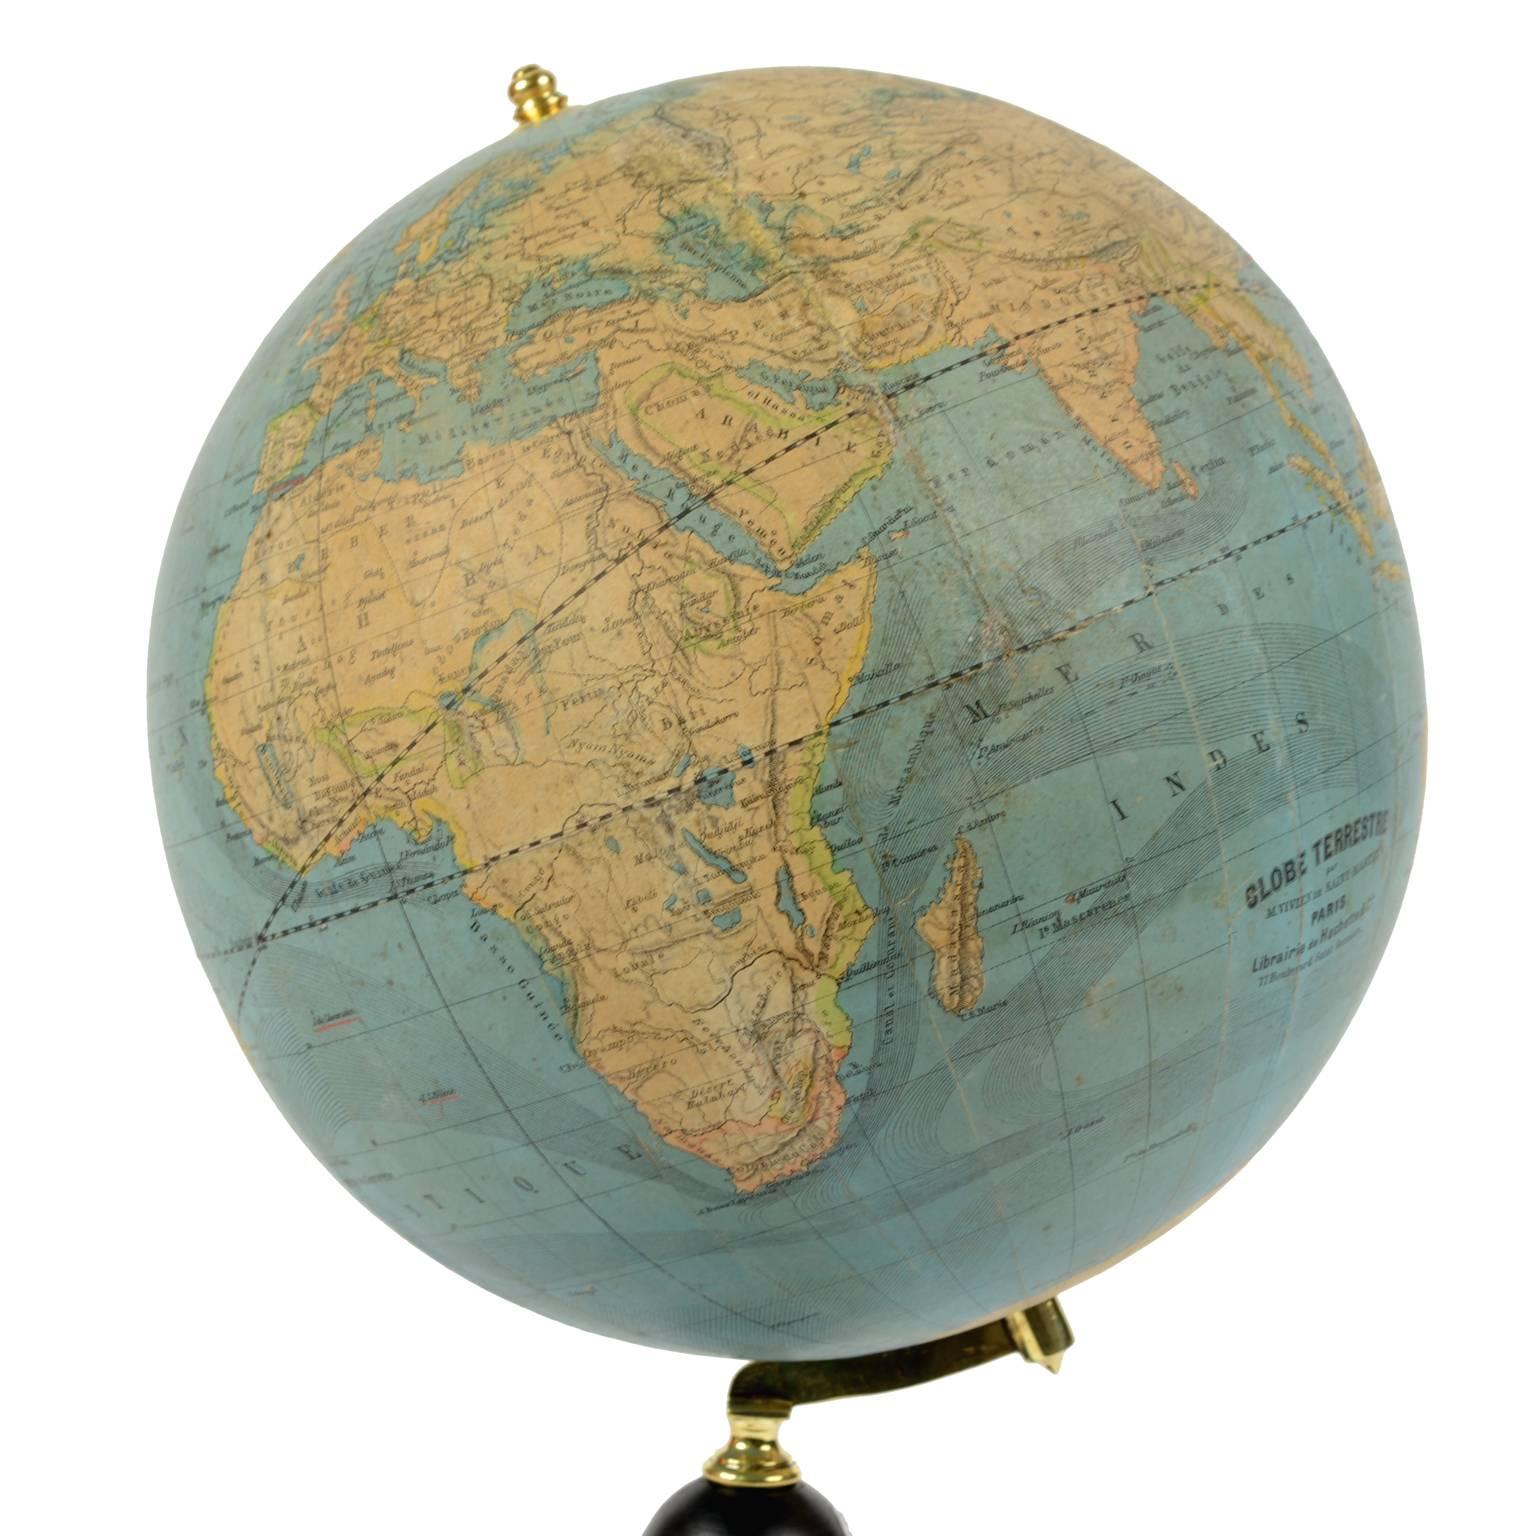 Antique terrestrial globe edited in the second half of the 19th century by M. Vivien de Saint Martin. There are territorial maps and oceanic currents. Turned ebonized wooden base, papier mâché sphere. Good condition. Measures: Height cm 45 - inches